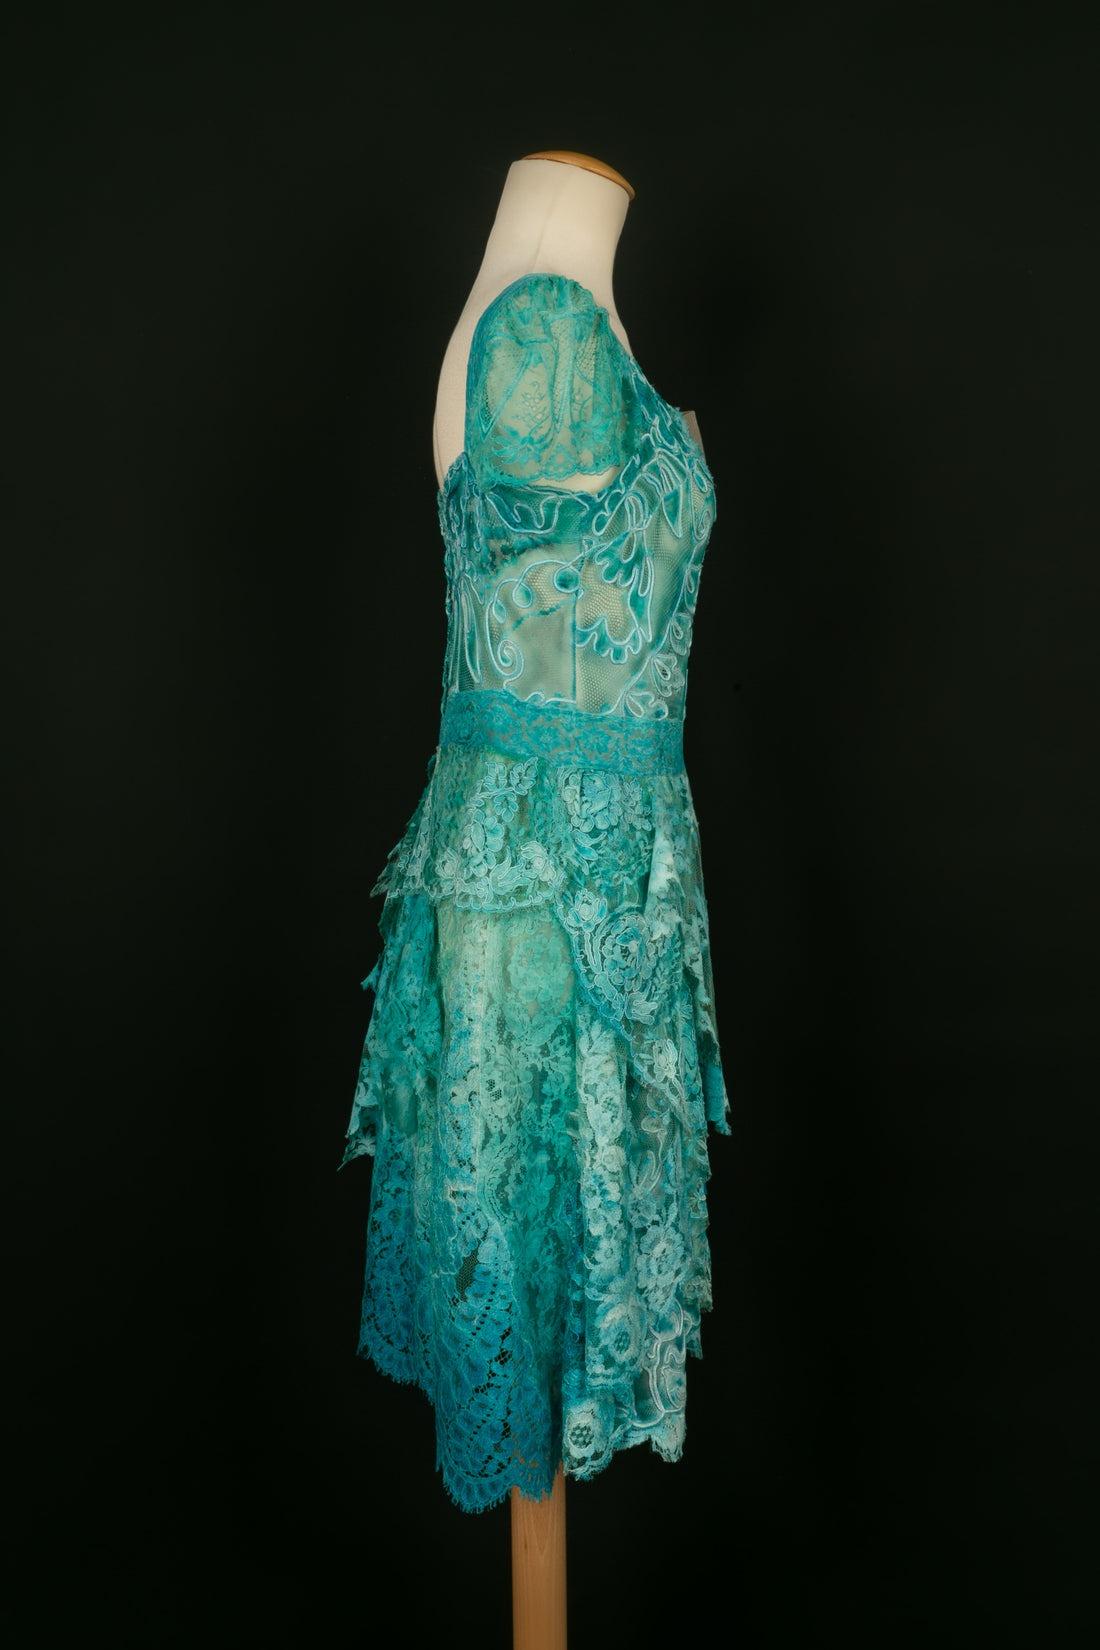 Christian Lacroix - Haute Couture blue tie-and-dye lace dress. No size indicated, it fits a 38FR.

Additional information:
Condition: Very good condition
Dimensions: Chest: 44 cm - Waist: 37 cm - Hips: 44 cm - Length: 98 cm

Seller Reference: VR246
